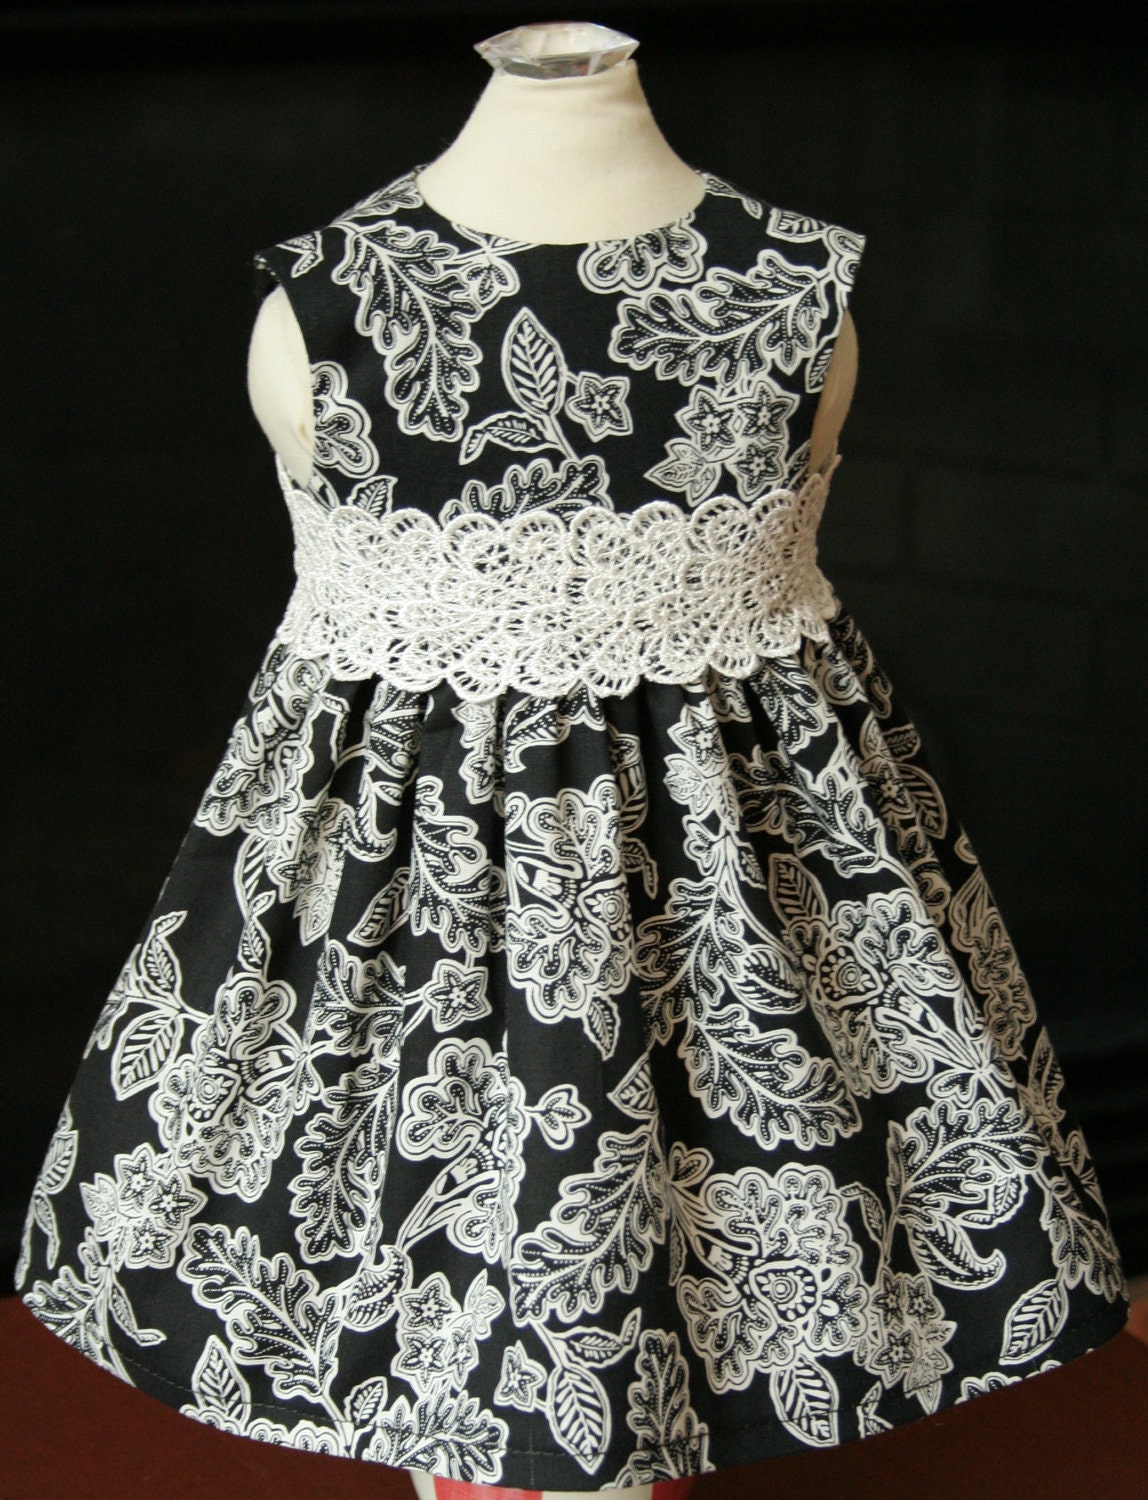 Classy Black and White Sun Dress with Lace Belt for 18" American Girl Dolls - Custom Handmade